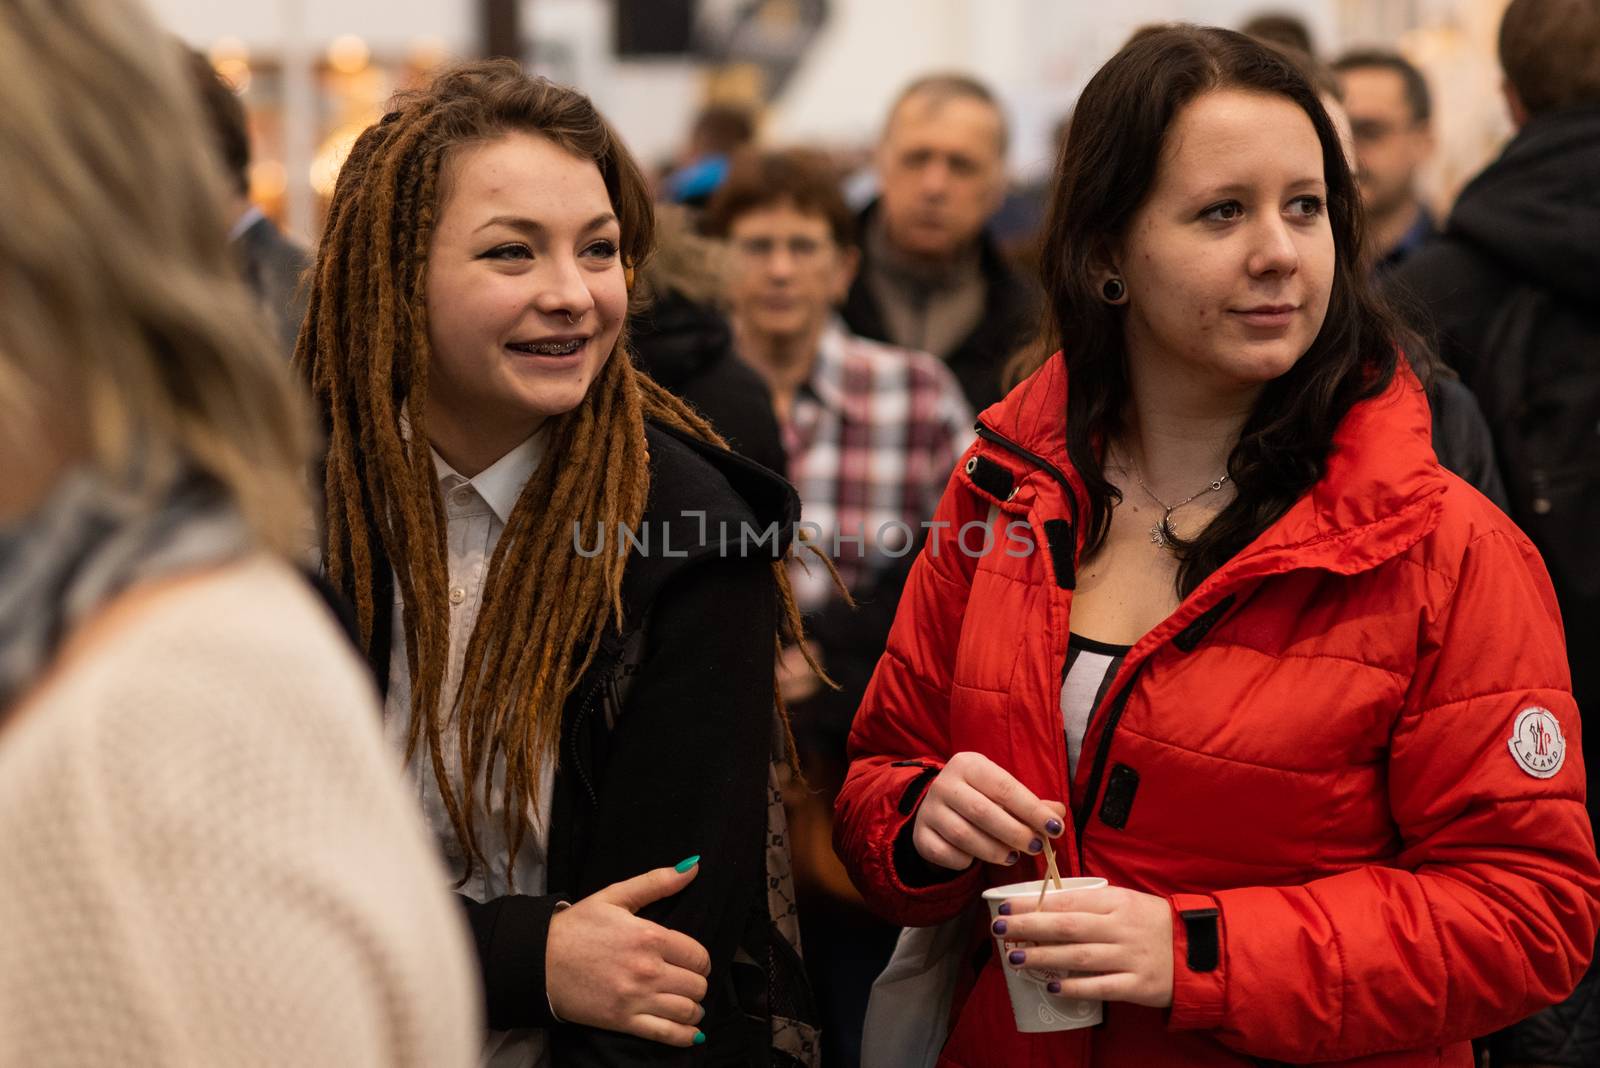 Two women walking in the crowd attending an event at the convention trade center in Brno. BVV Brno Exhibition center. Czech Republic